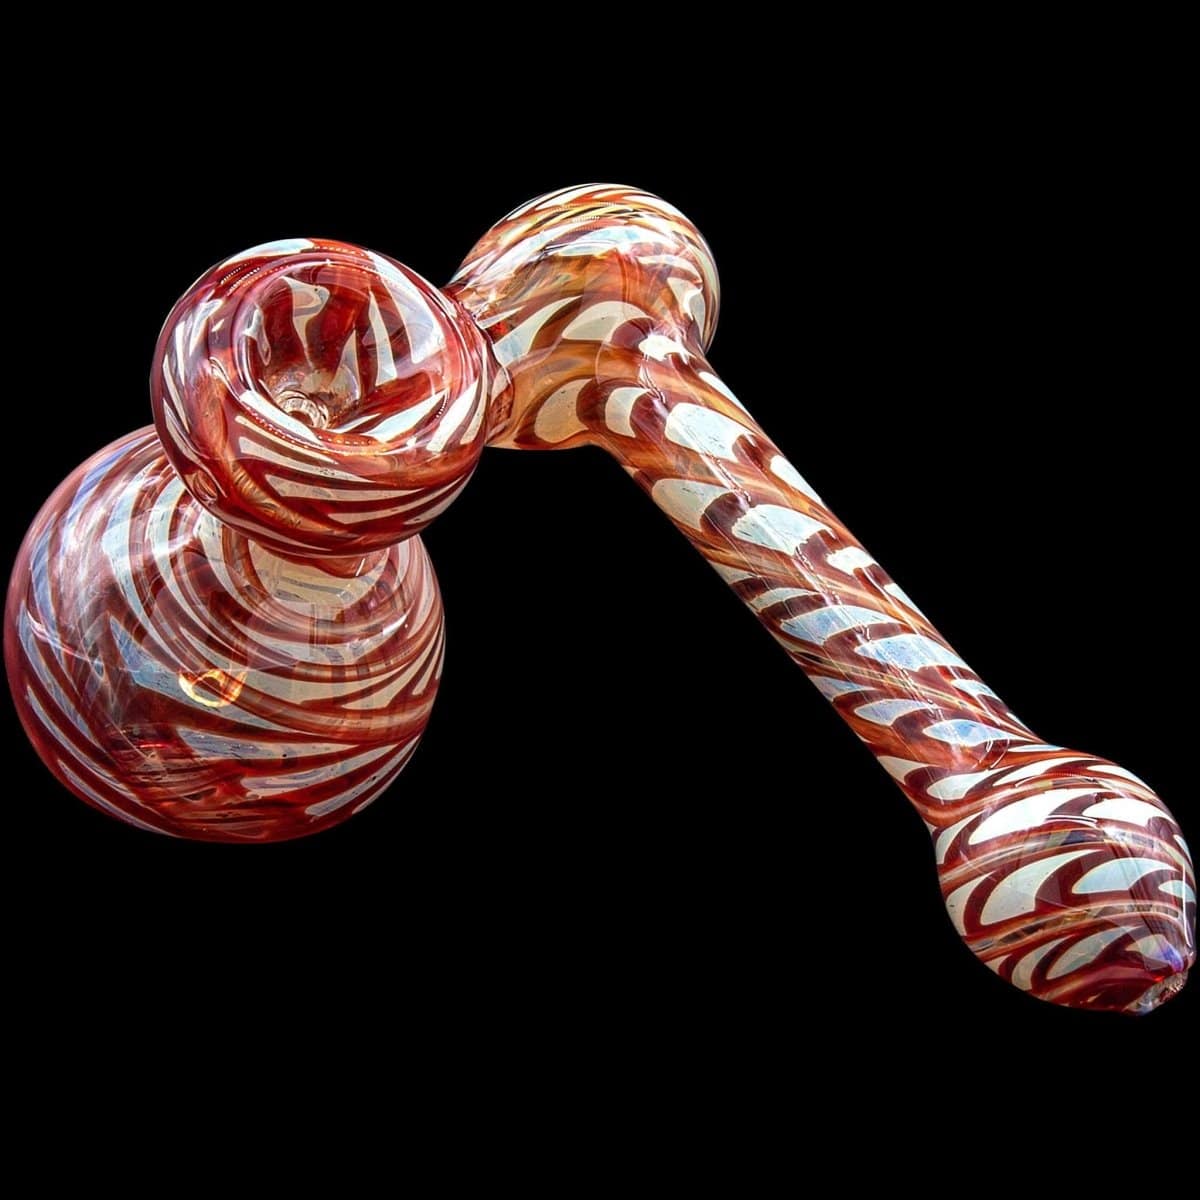 LA Pipes Bubbler Ruby Red "Colored Sidecar" Fumed Sidecar Bubbler Pipe (Various Colors)